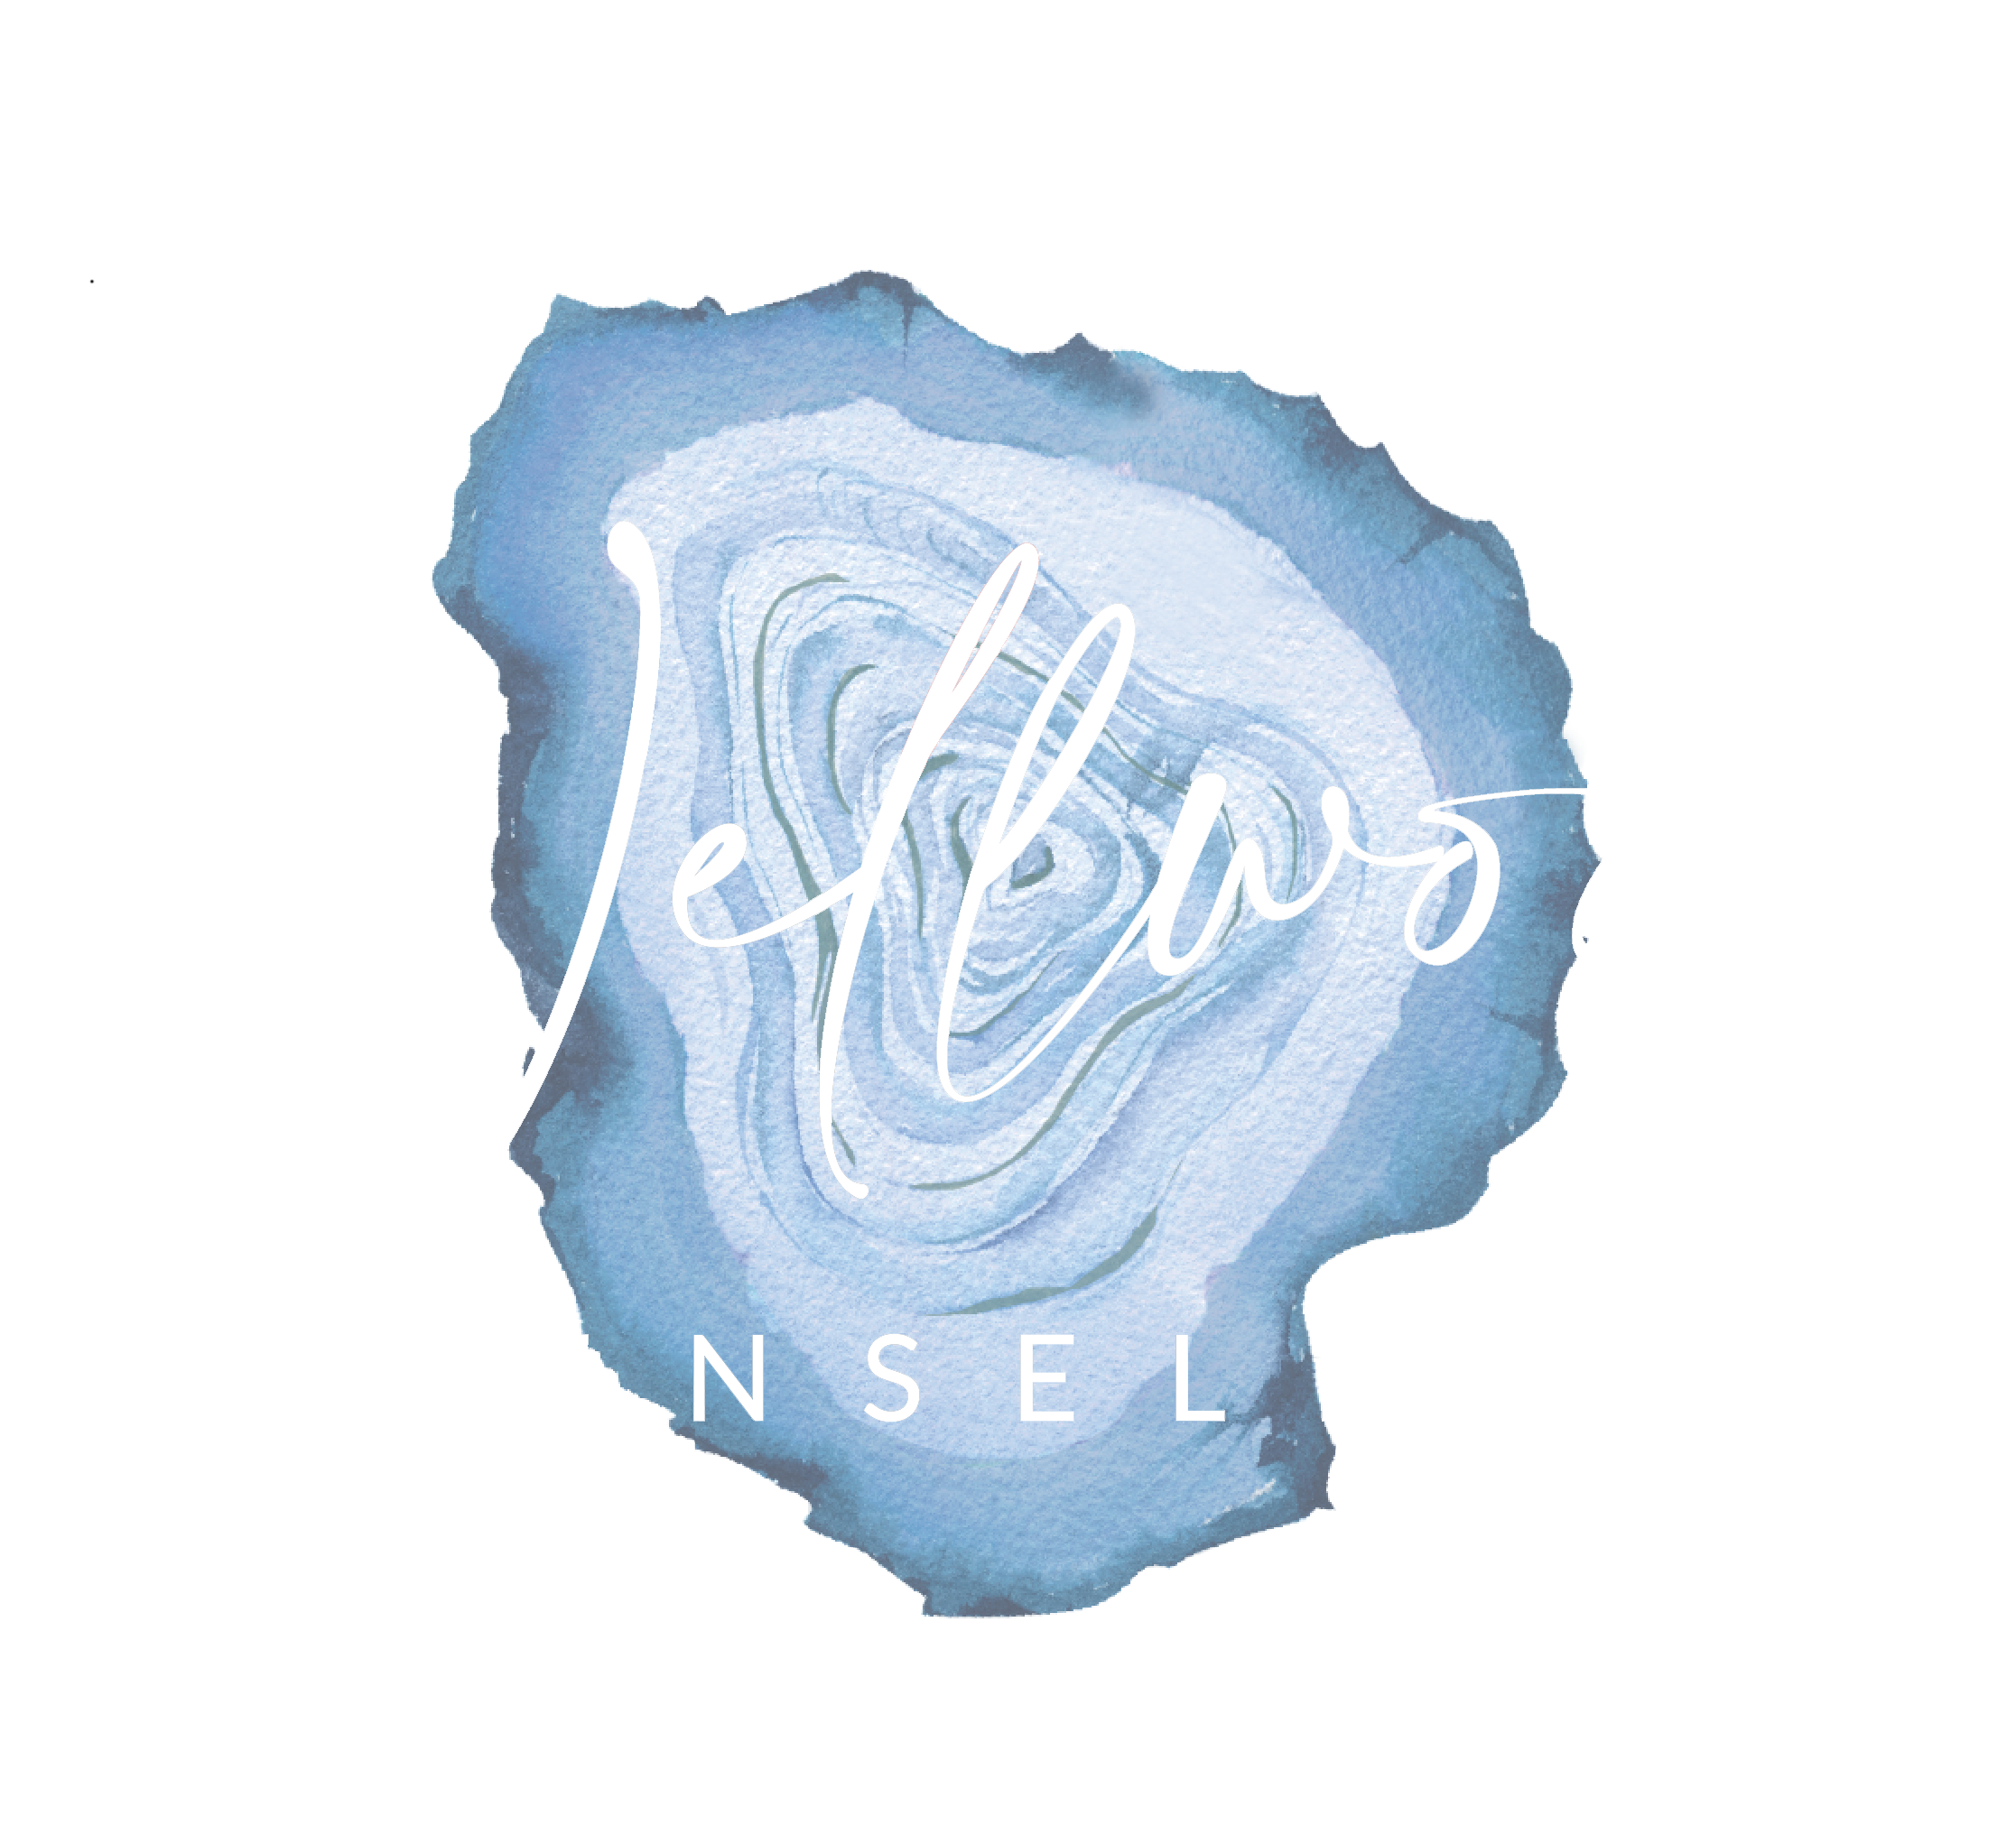 Wellwood Counselling